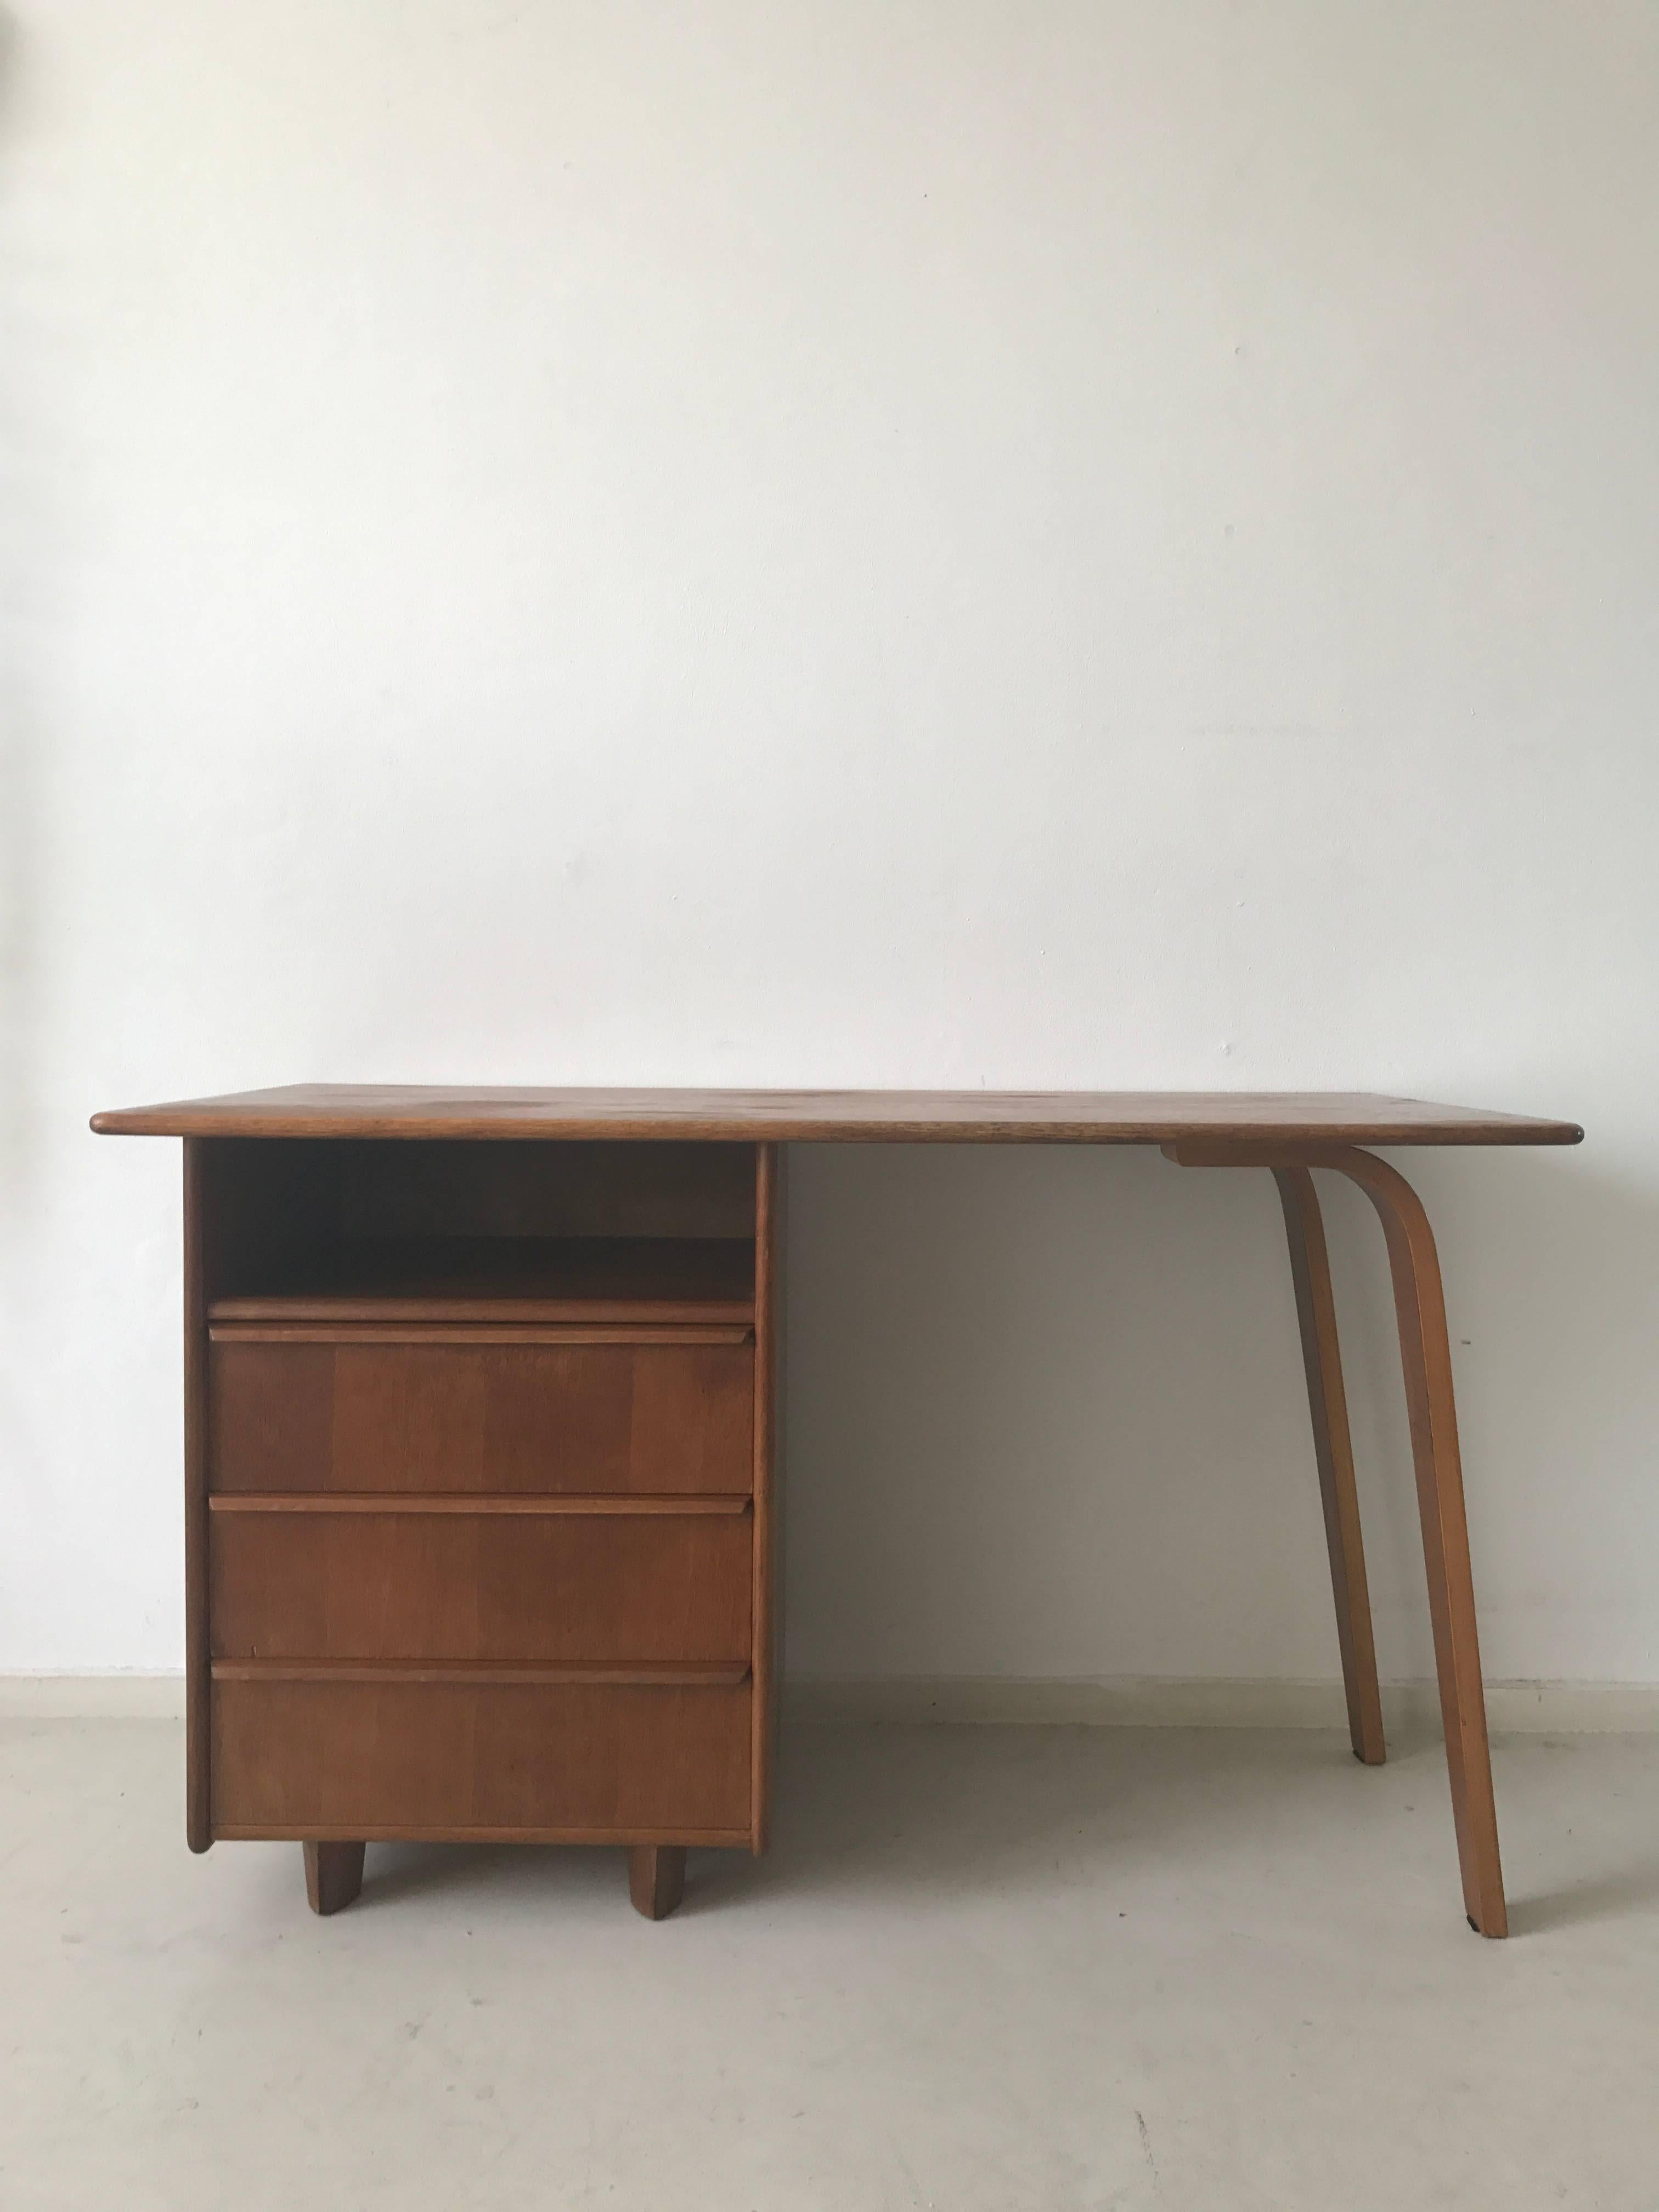 EE02 desk designed by Cees Braakman for Pastoe, 1948 in the Netherlands. The desk comes with three drawers with interior in plywood. It remains in a very good condition with some signs of wear, consistent with age and use.